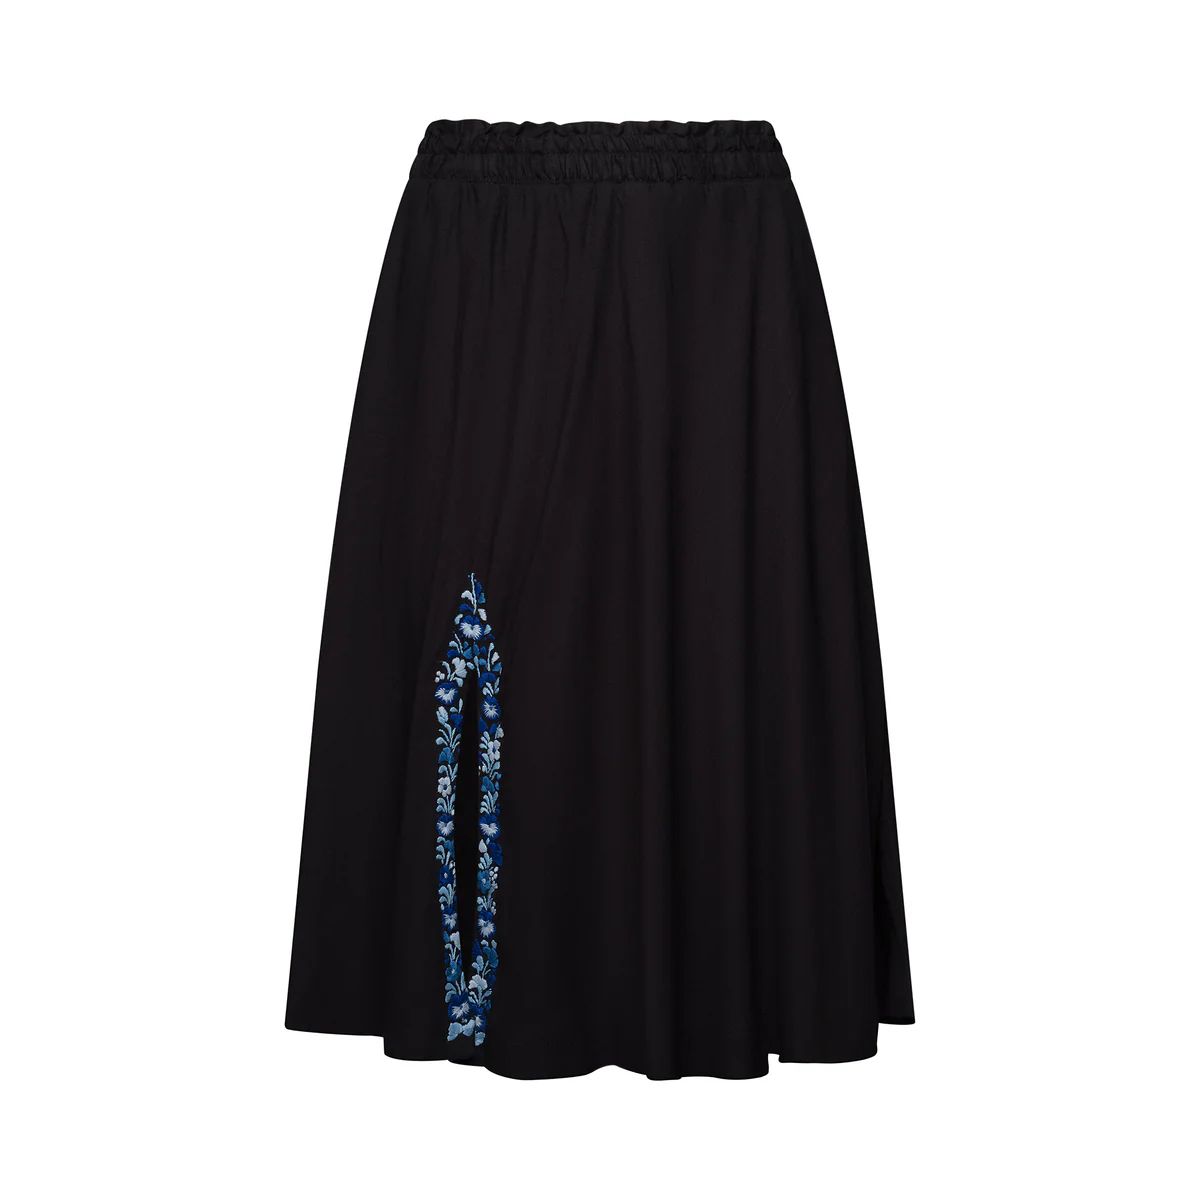 The Cecilia Skirt in Black with Blue | La Peony Clothing